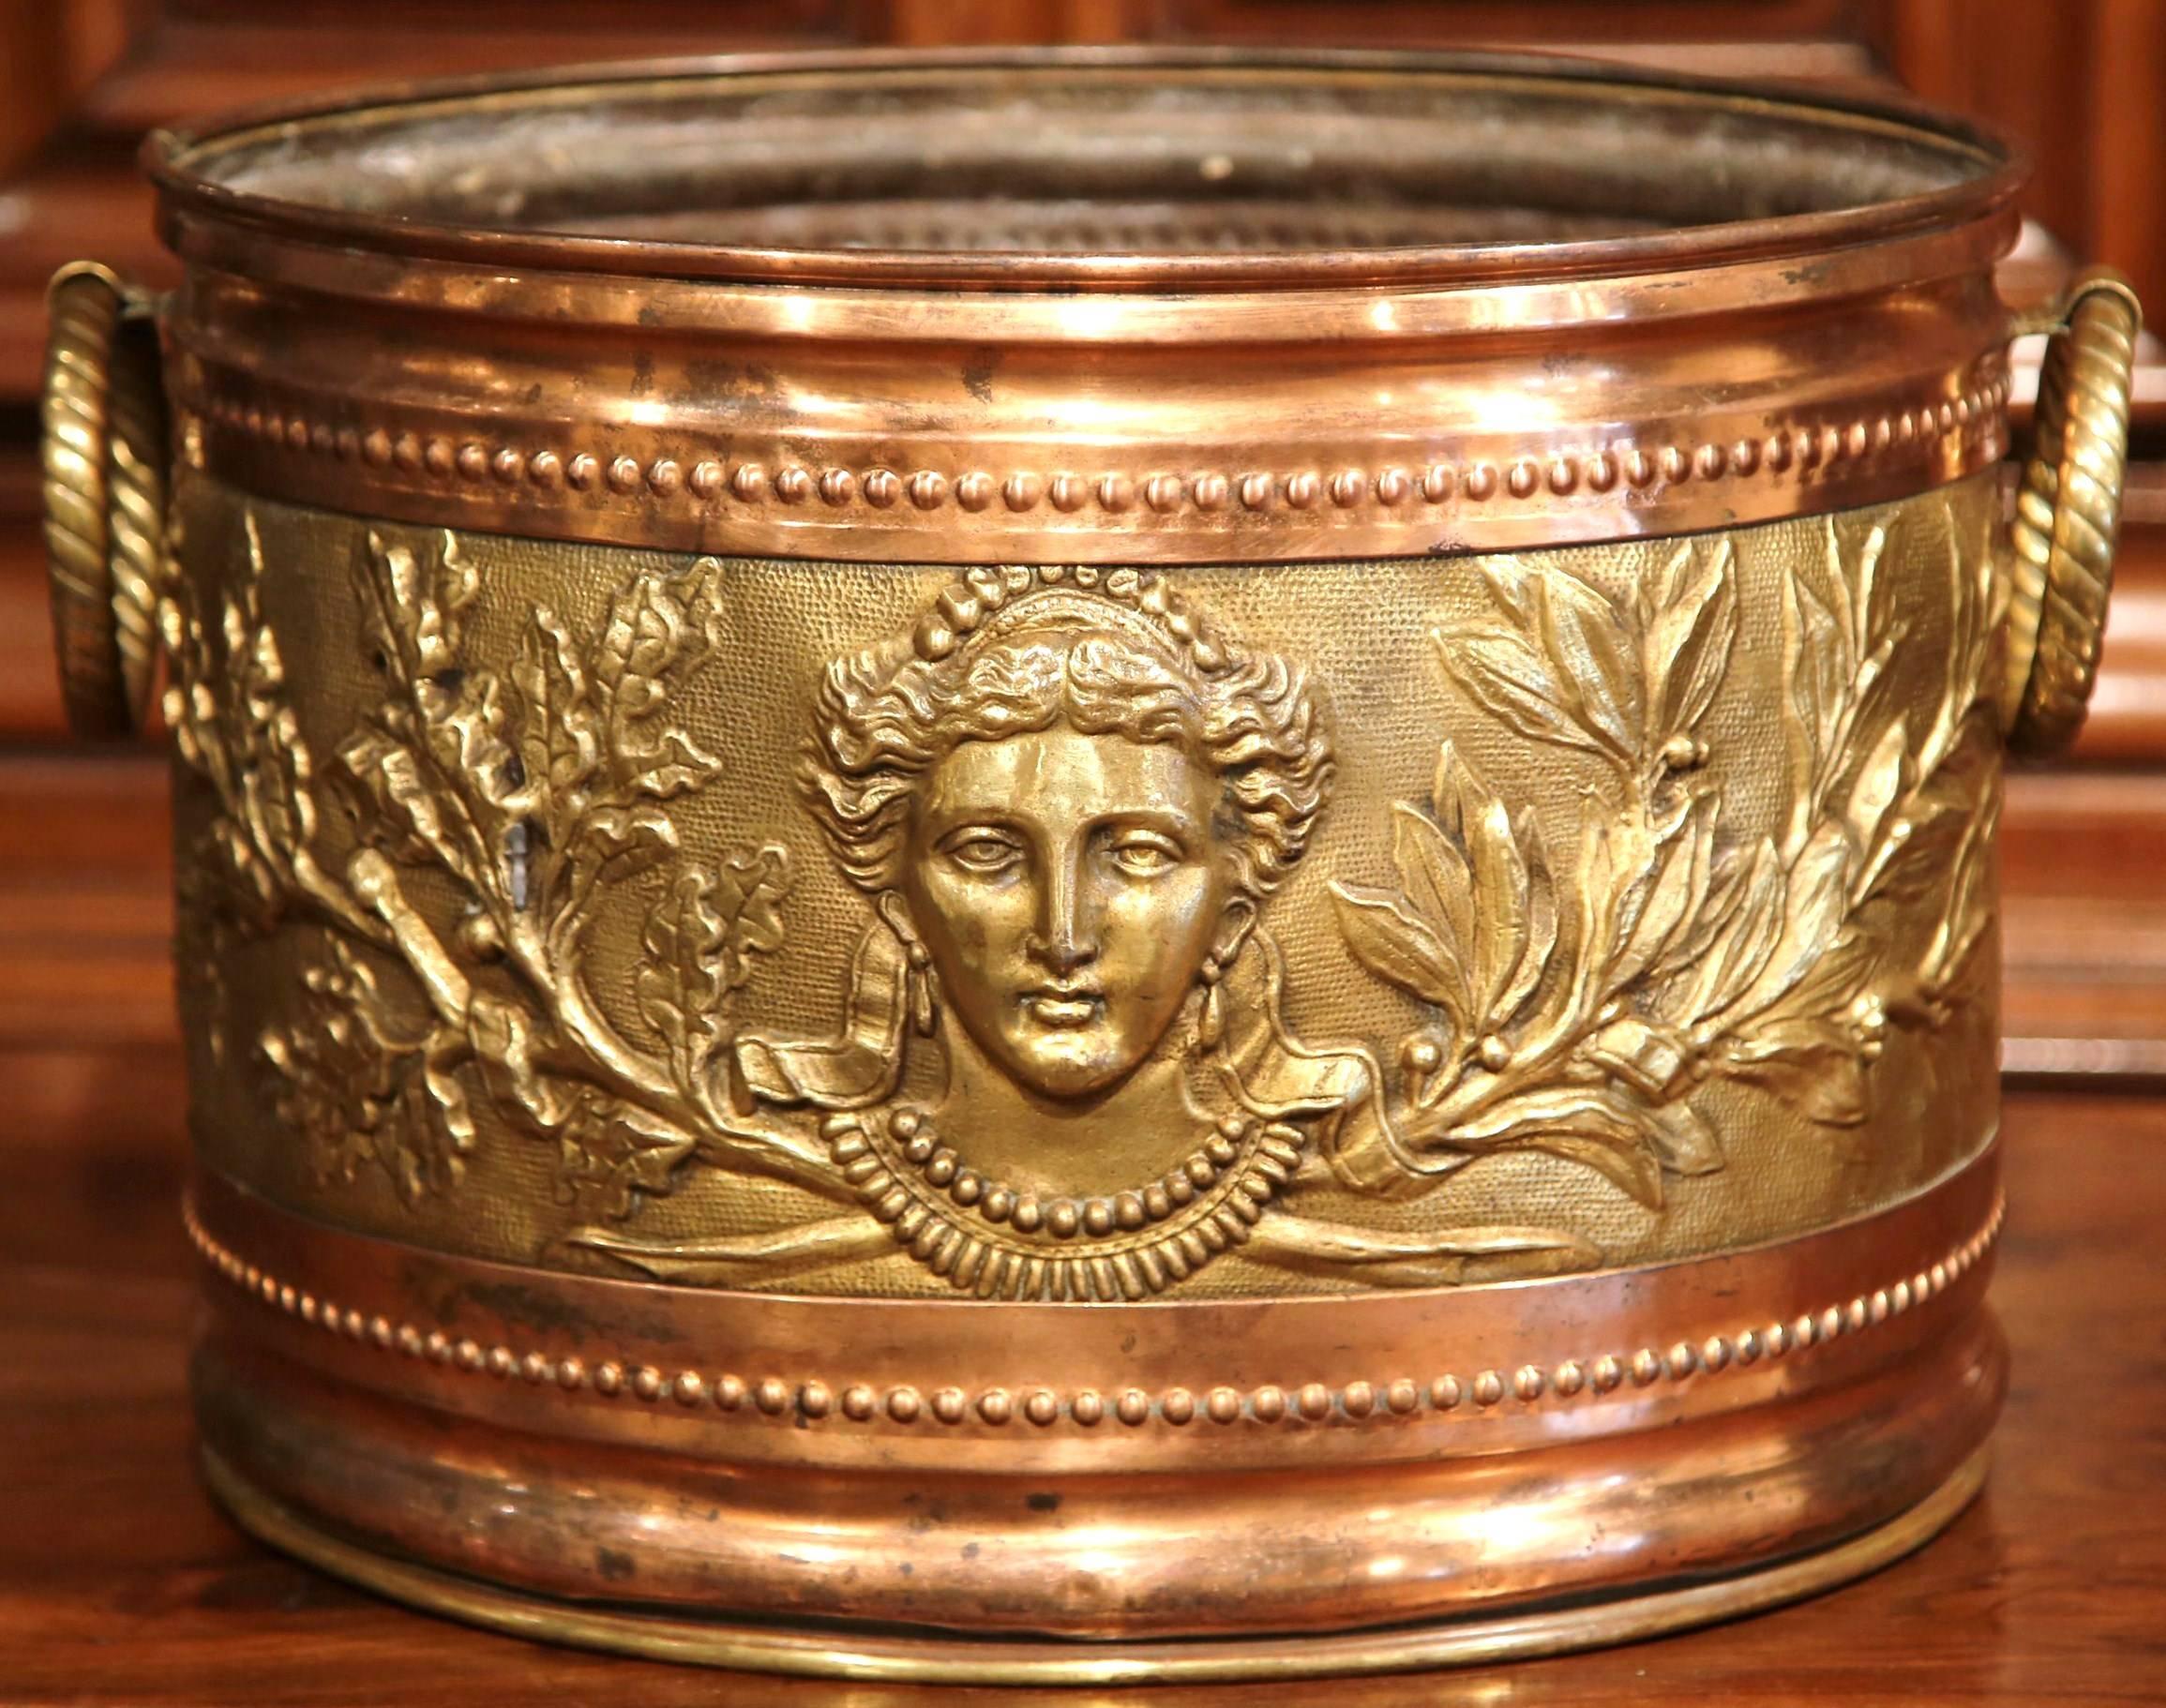 Hand-Crafted 19th Century French Copper and Brass Circular Basket with Repoussé Decor